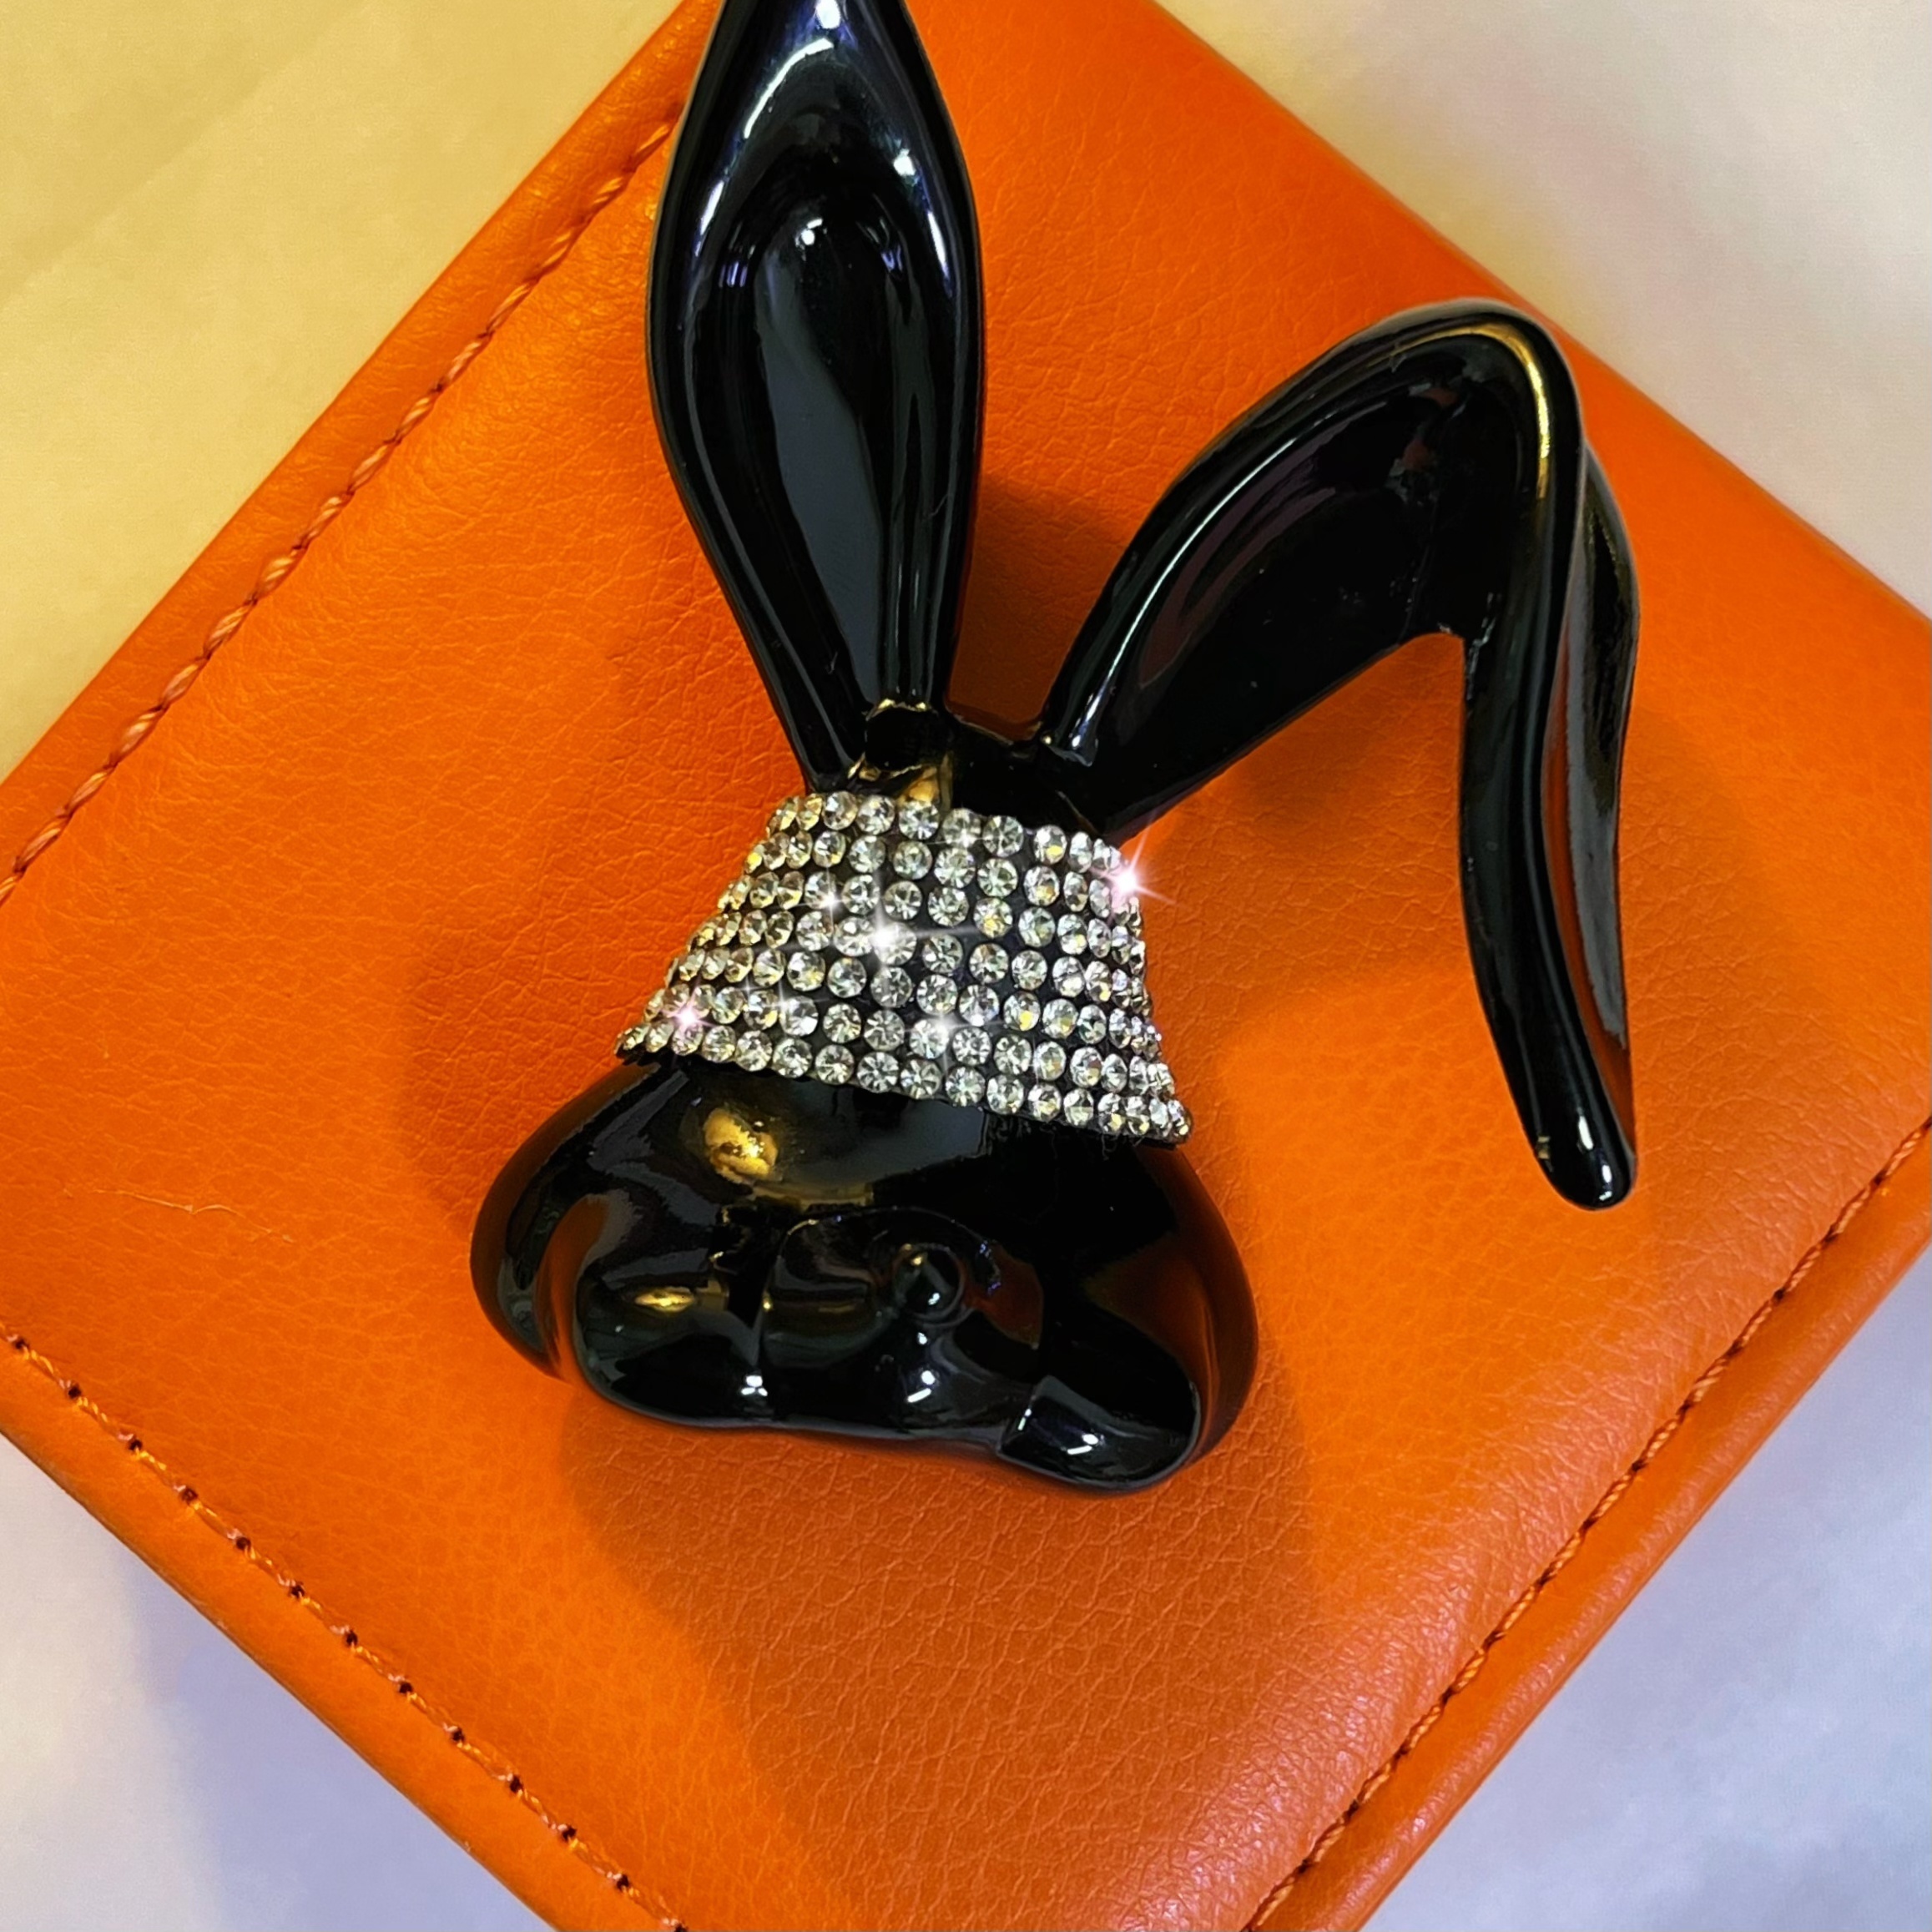 Louis Vuitton Playboy bunny design. This one was done in a 20oz